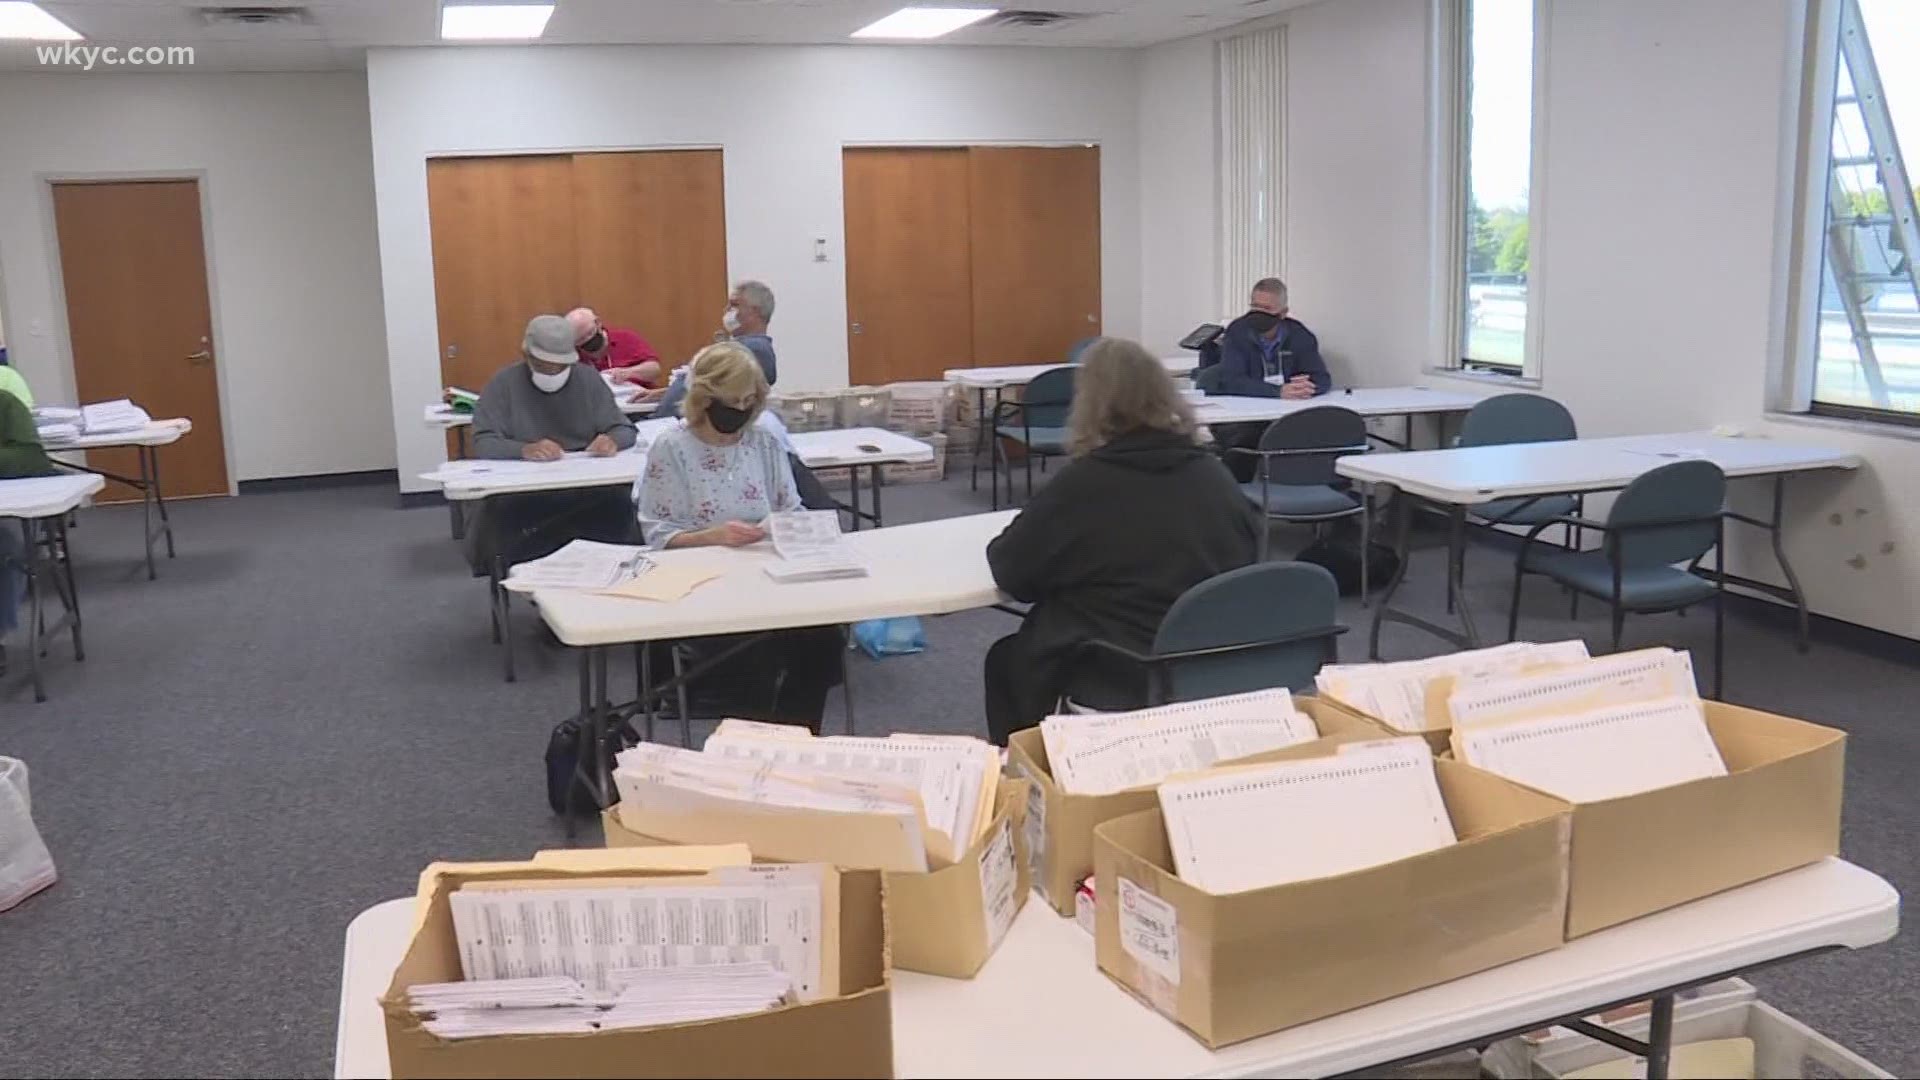 Record absentee voting numbers are being set across the country, and the Akron area is no exception. Brandon Simmons reports.